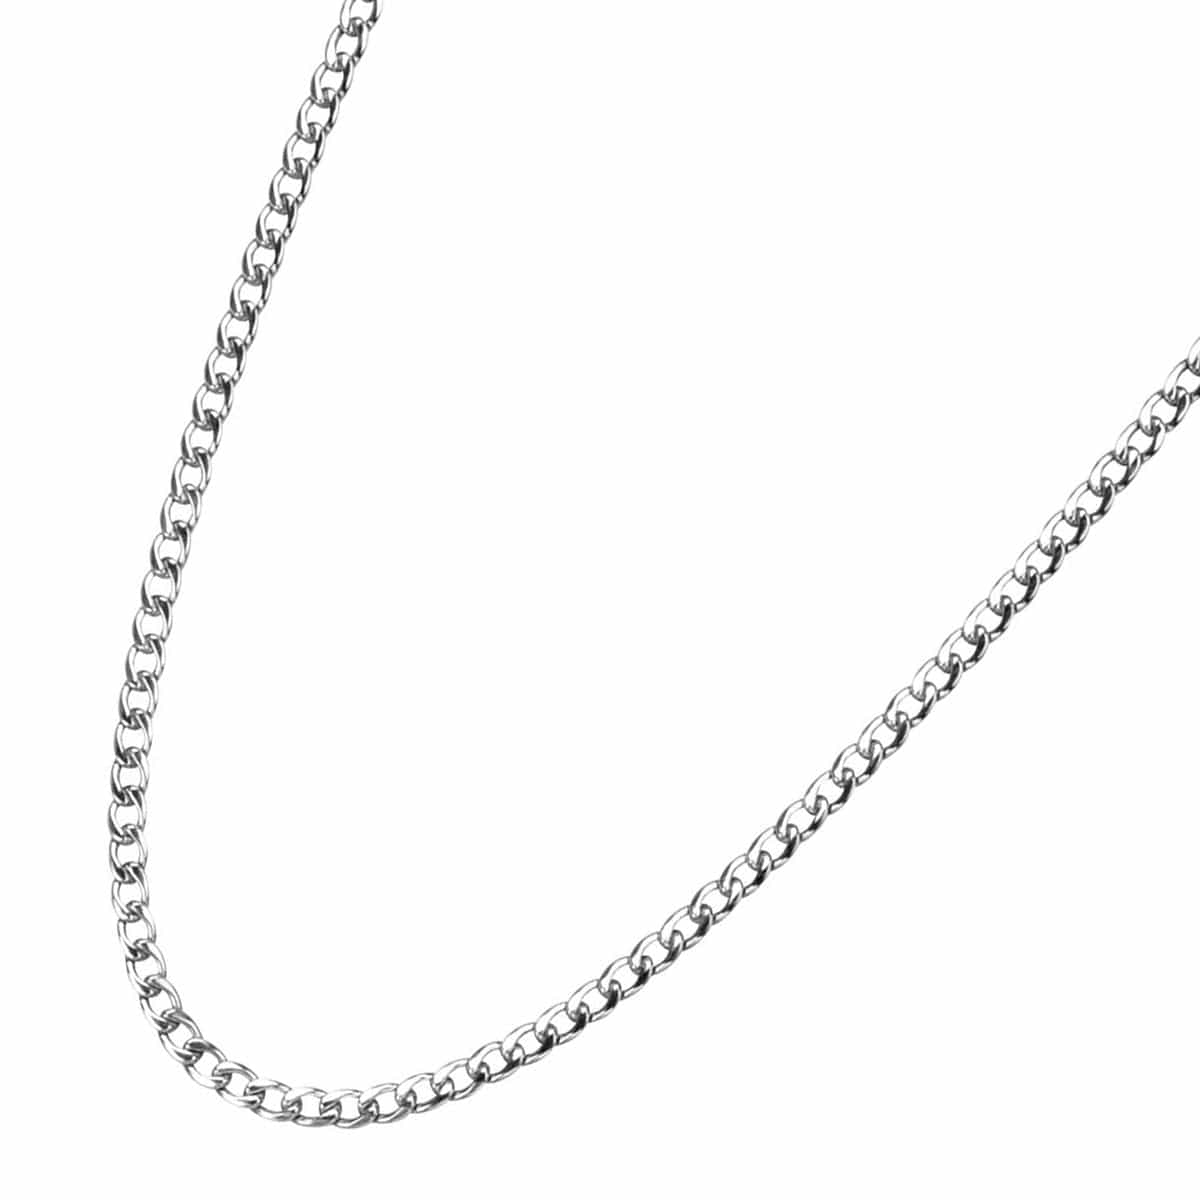 INOX JEWELRY Chains Silver Tone Stainless Steel Small 4.8mm Round Curb Chain